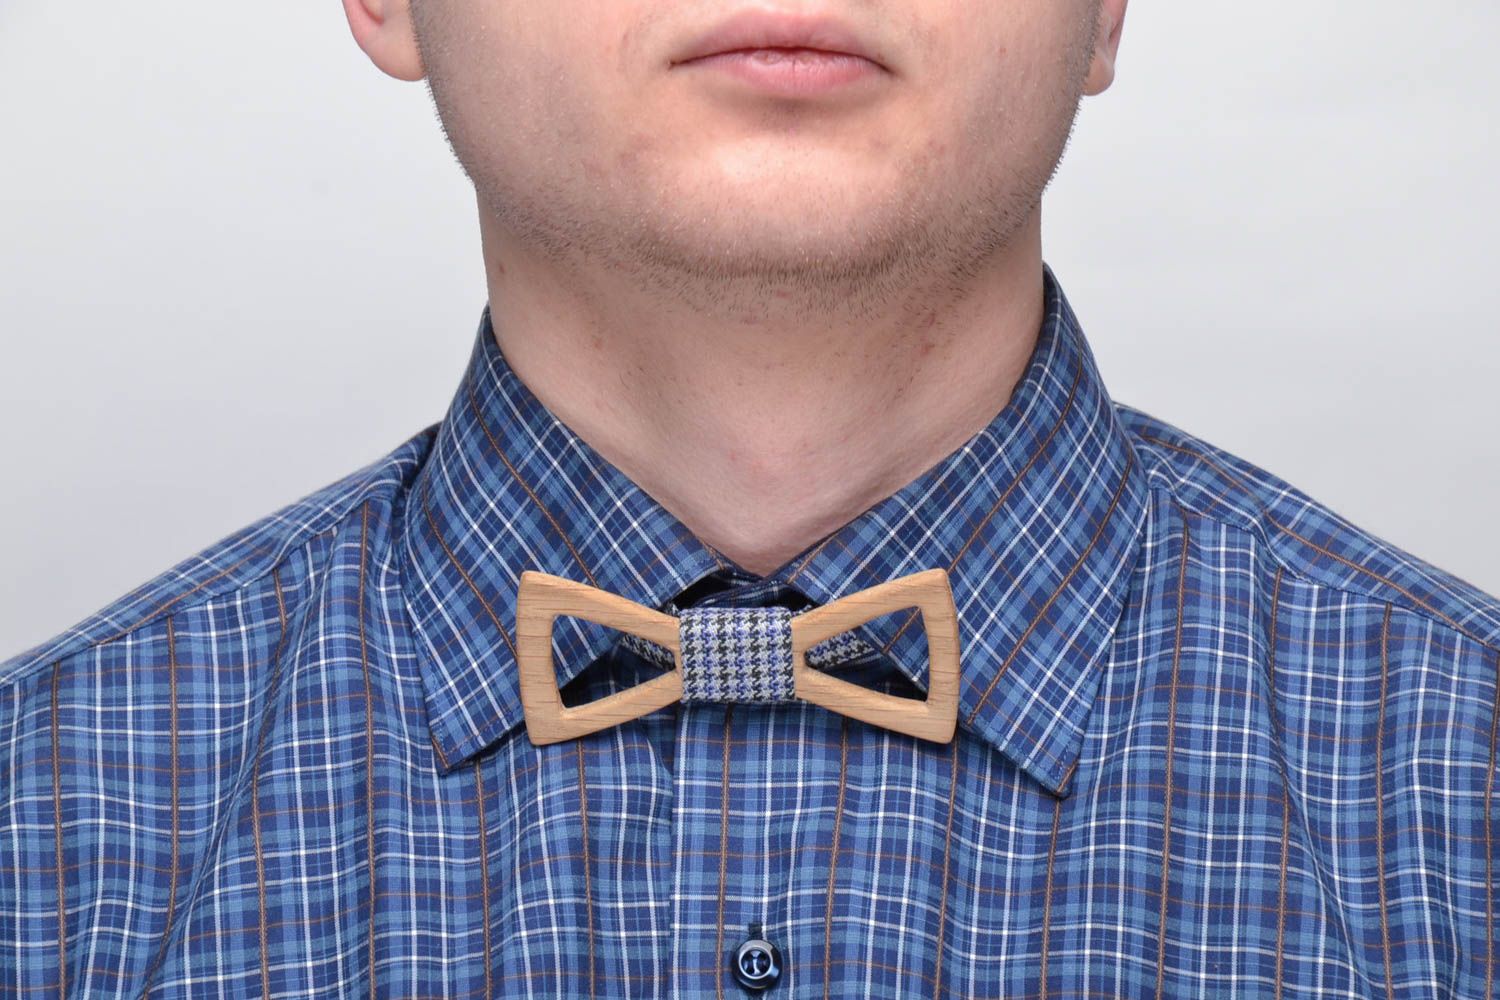 Wooden bow tie photo 2